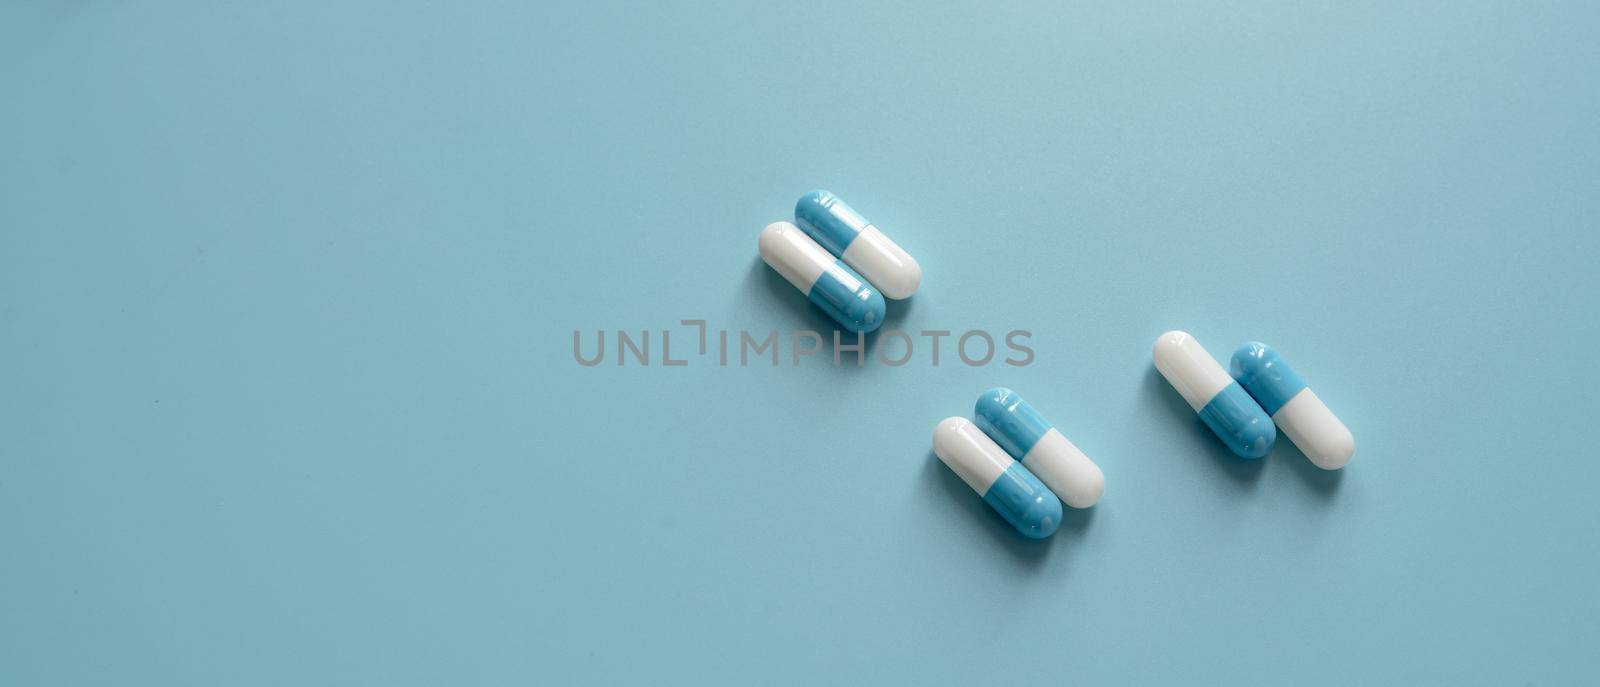 Blue and white capsule pills on blue background. Prescription drugs. Pharmaceutics background. Pharmaceutical industry. Dose of medicine for treating illness. Healthcare and medicine. Medical care.